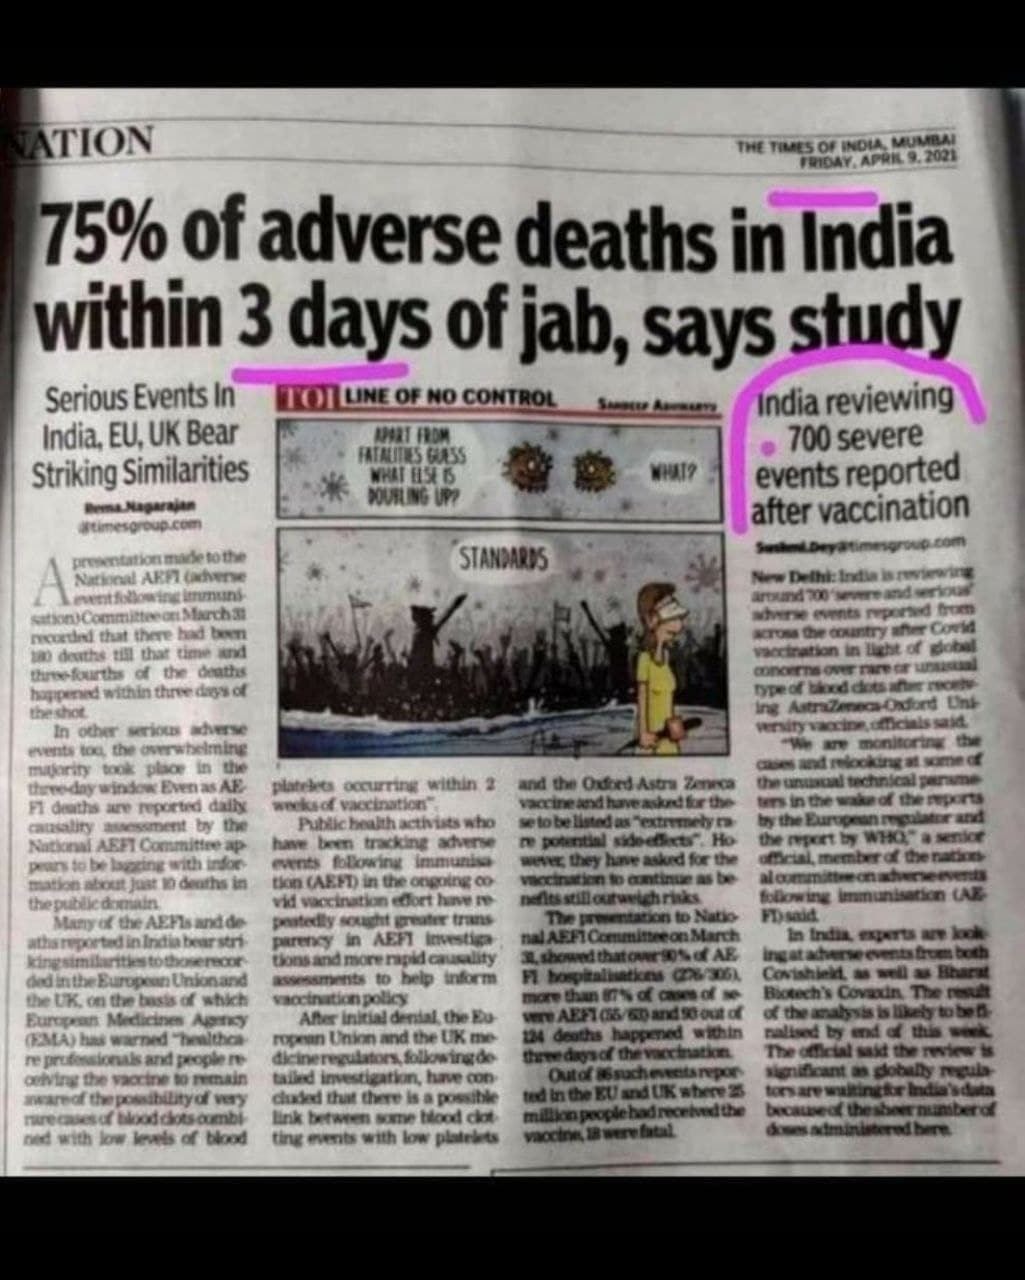 Na obrázku môže byť text, v ktorom sa píše „ATION FRIDAY, 75% of adverse deaths in India within 3 days of jab, says study Serious Events In India reviewing India, EU, UK Bear 700 severe Striking Similarities events reported after vaccination STANDARUS within“